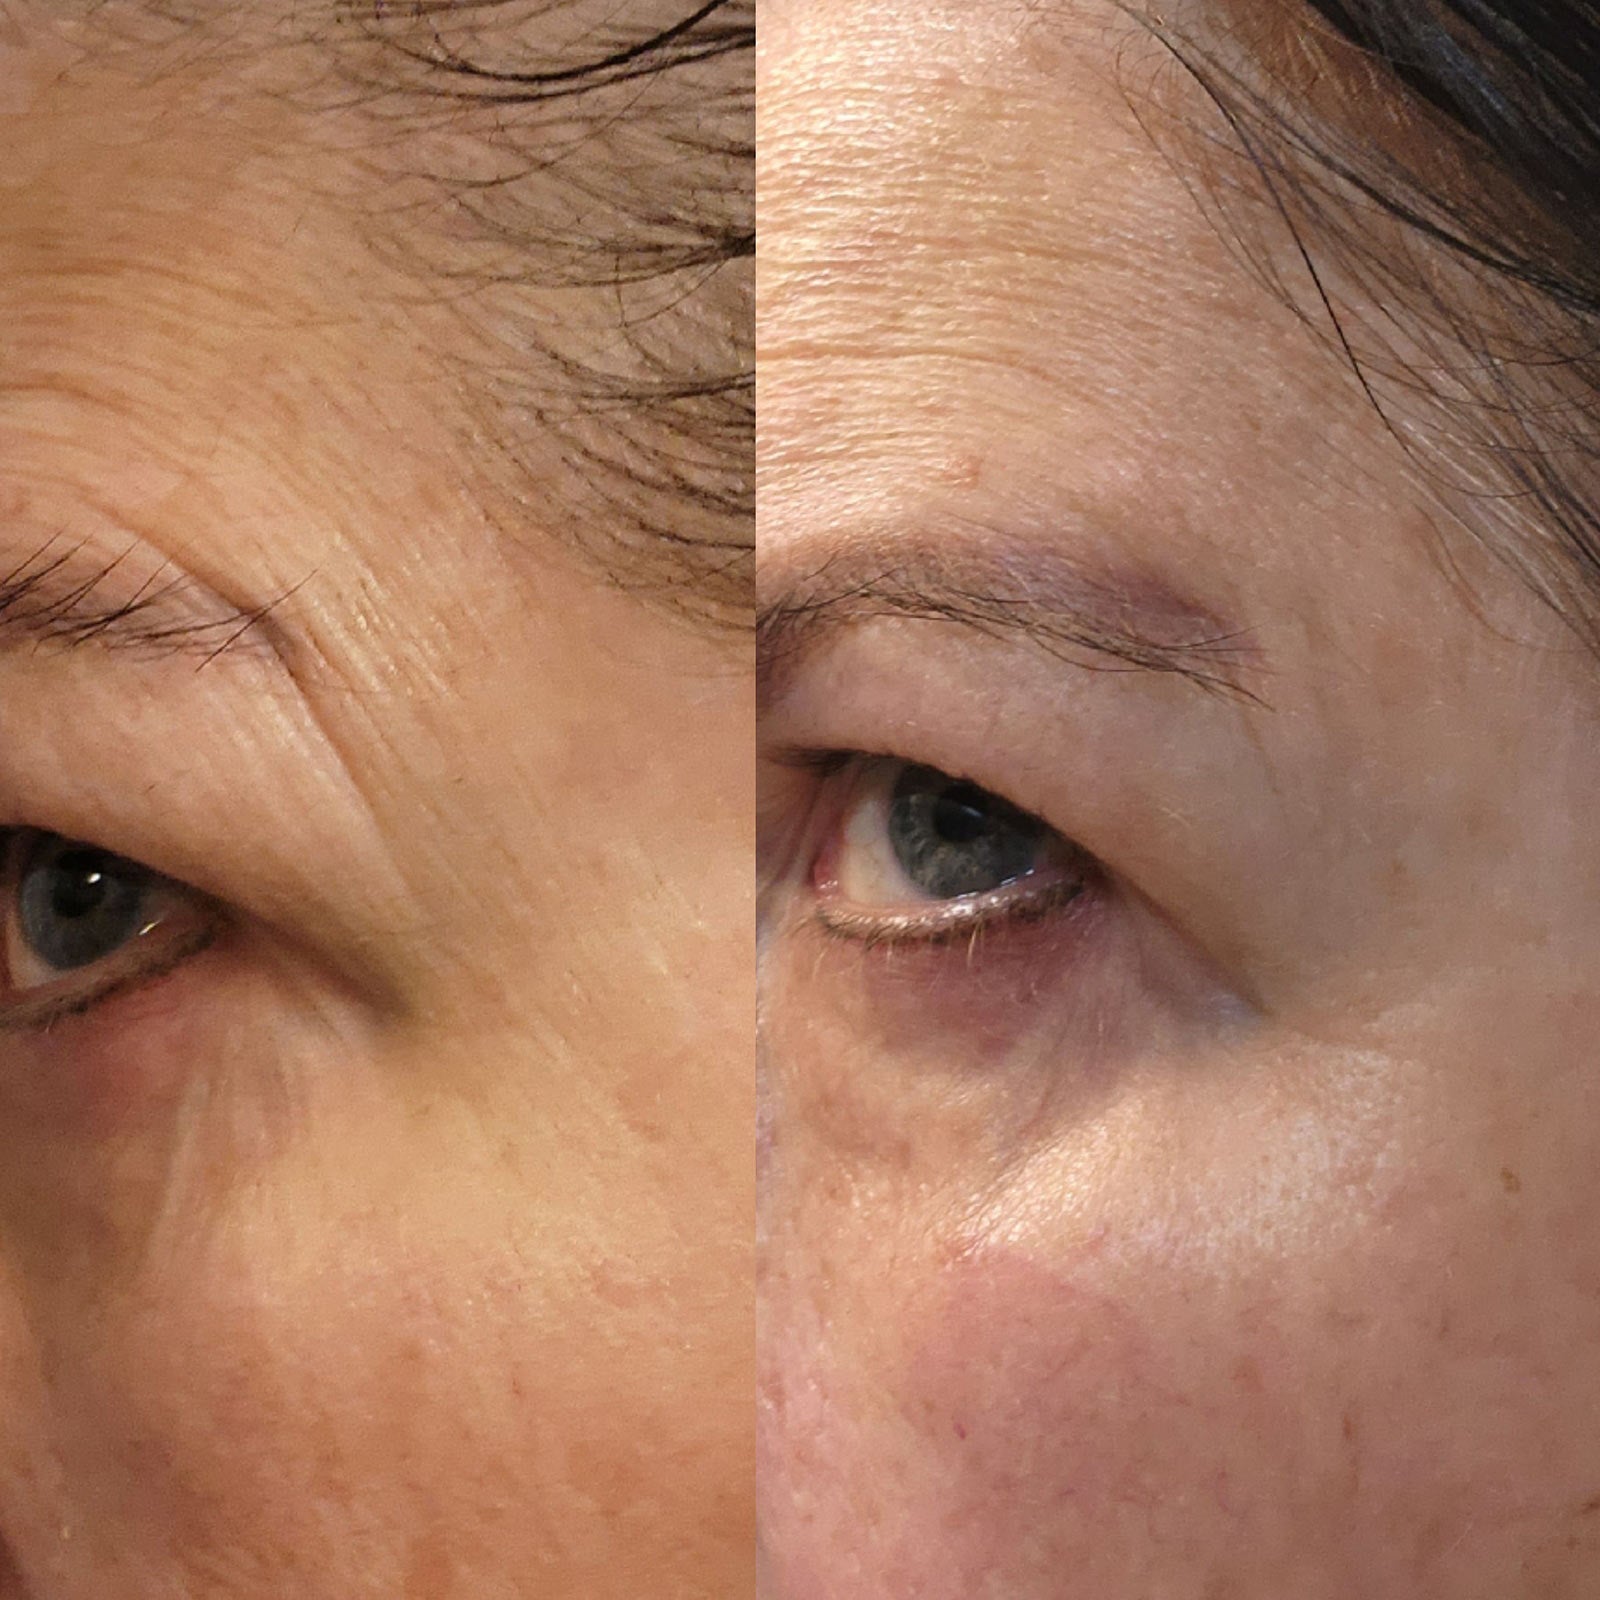 Before and After Comparison Using Skin Authority Wrinkle Reversing Serum